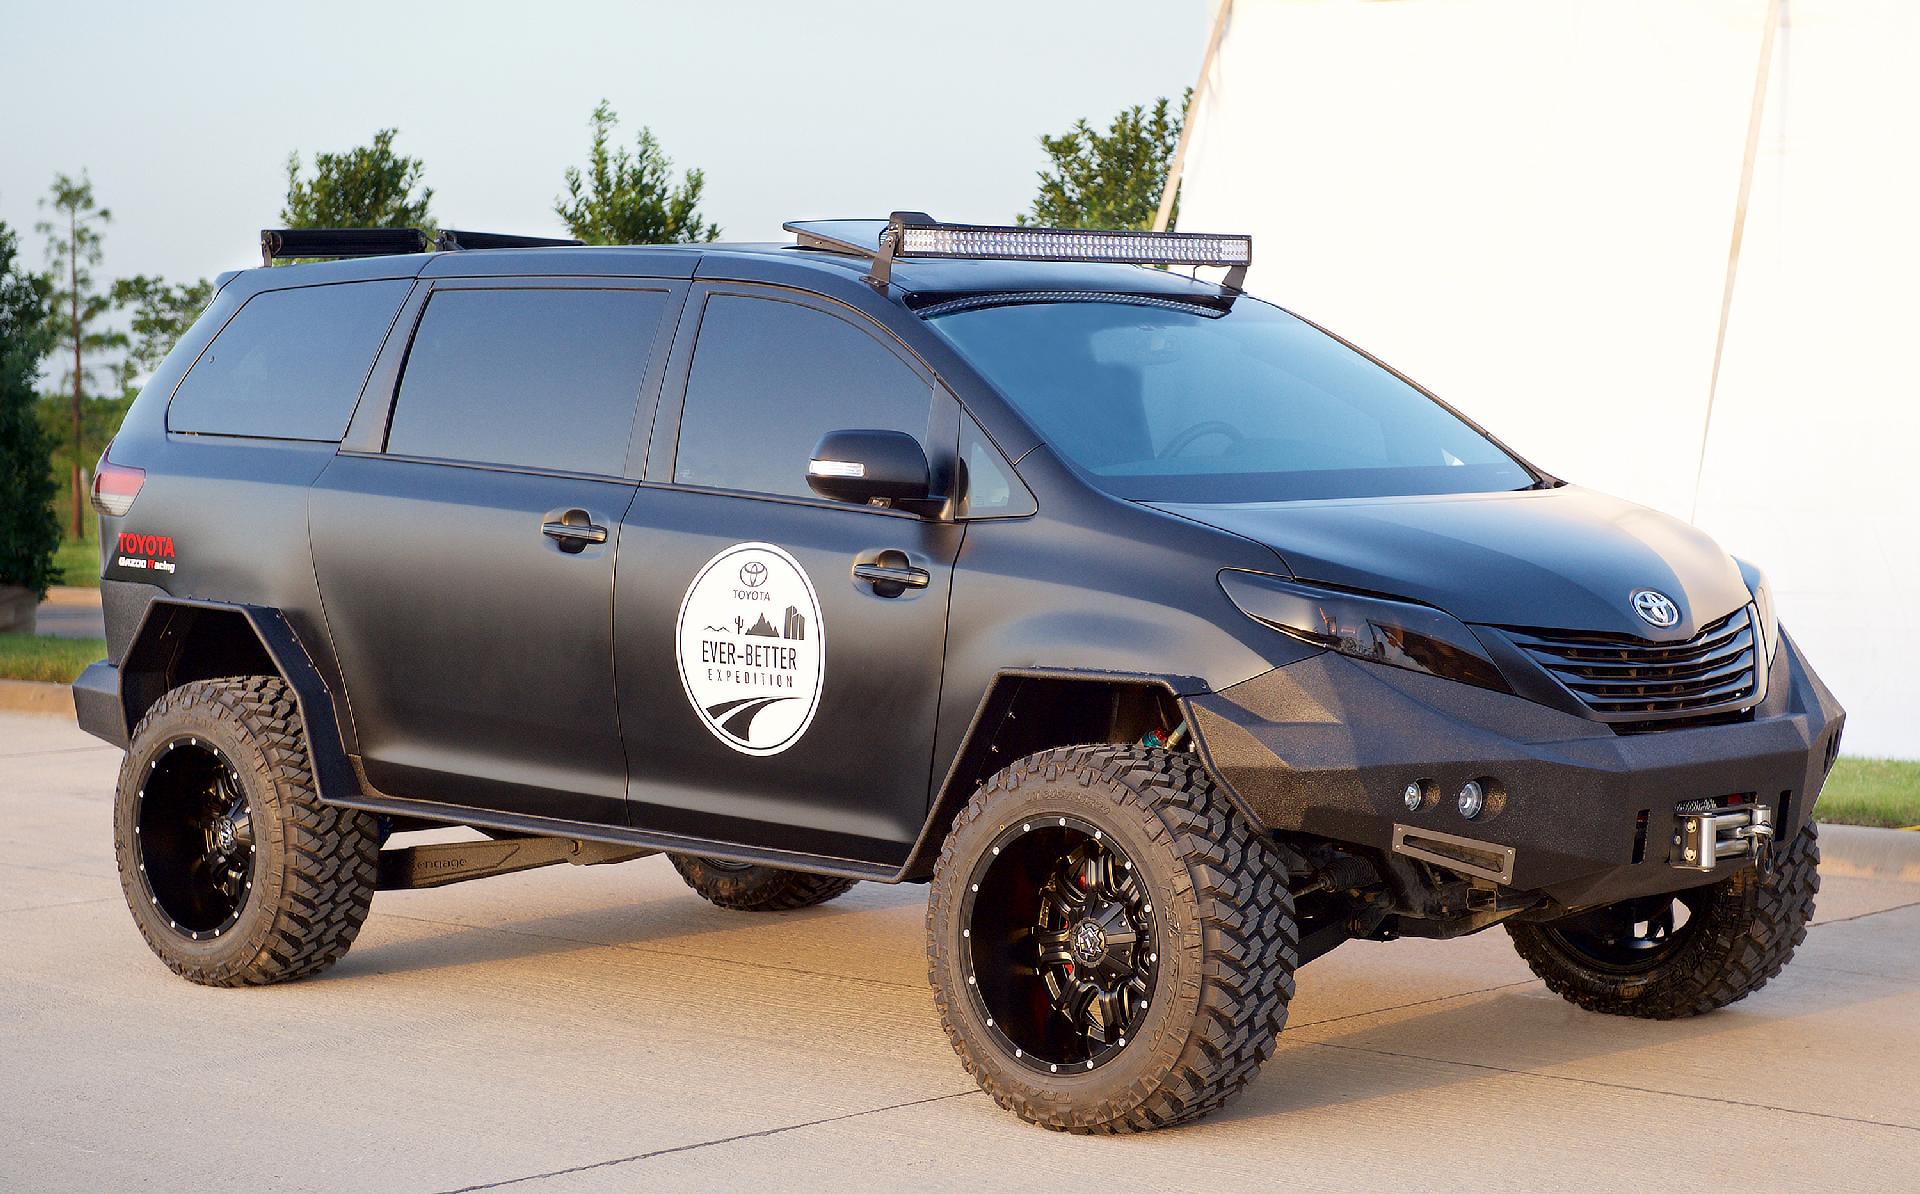 Toyota Ever-Better Expedition – Toyota Ultimate Utility Vehicle (UUV)